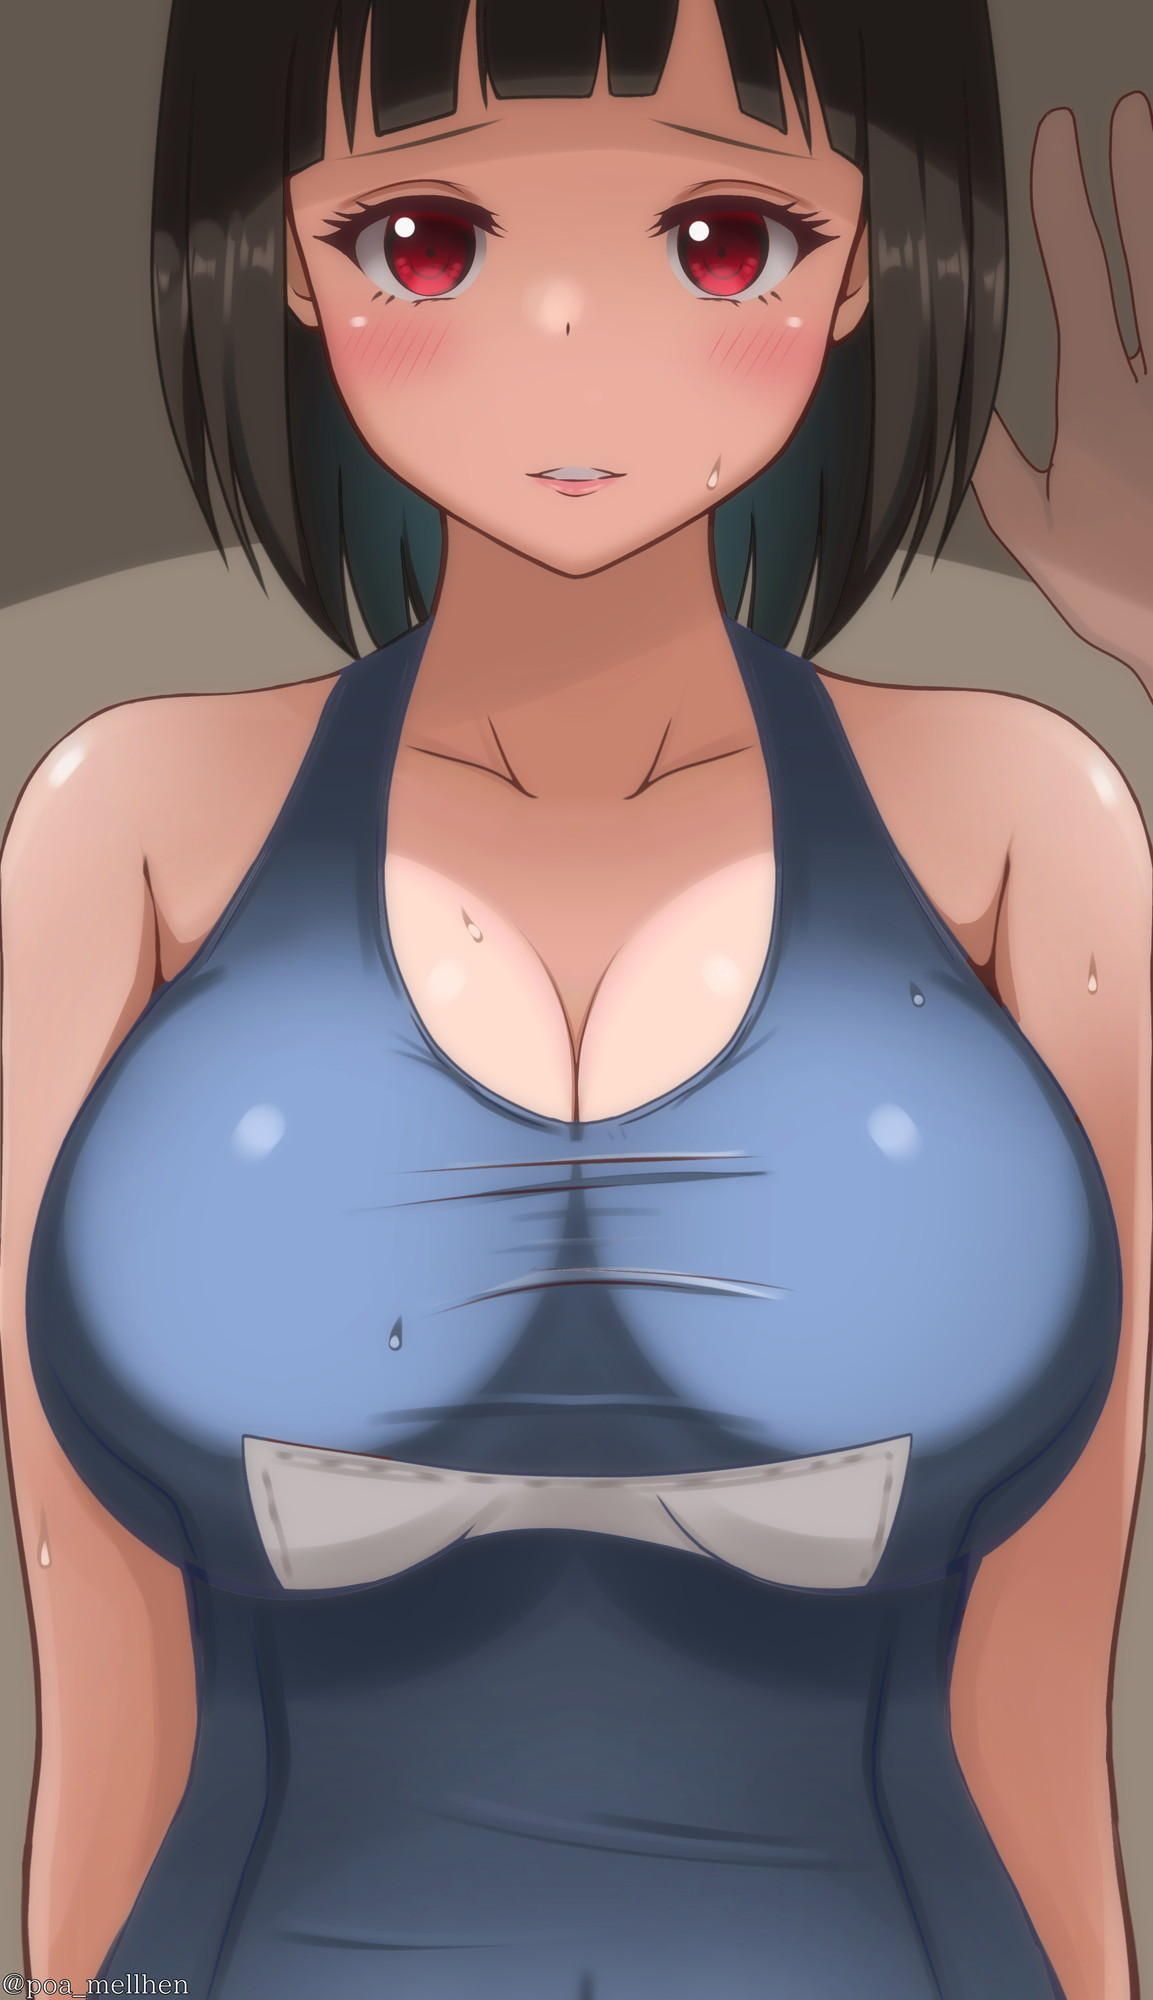 This is a two-dimensional erotic image of a girl wearing plump squirt water that says "This is no good..." 21